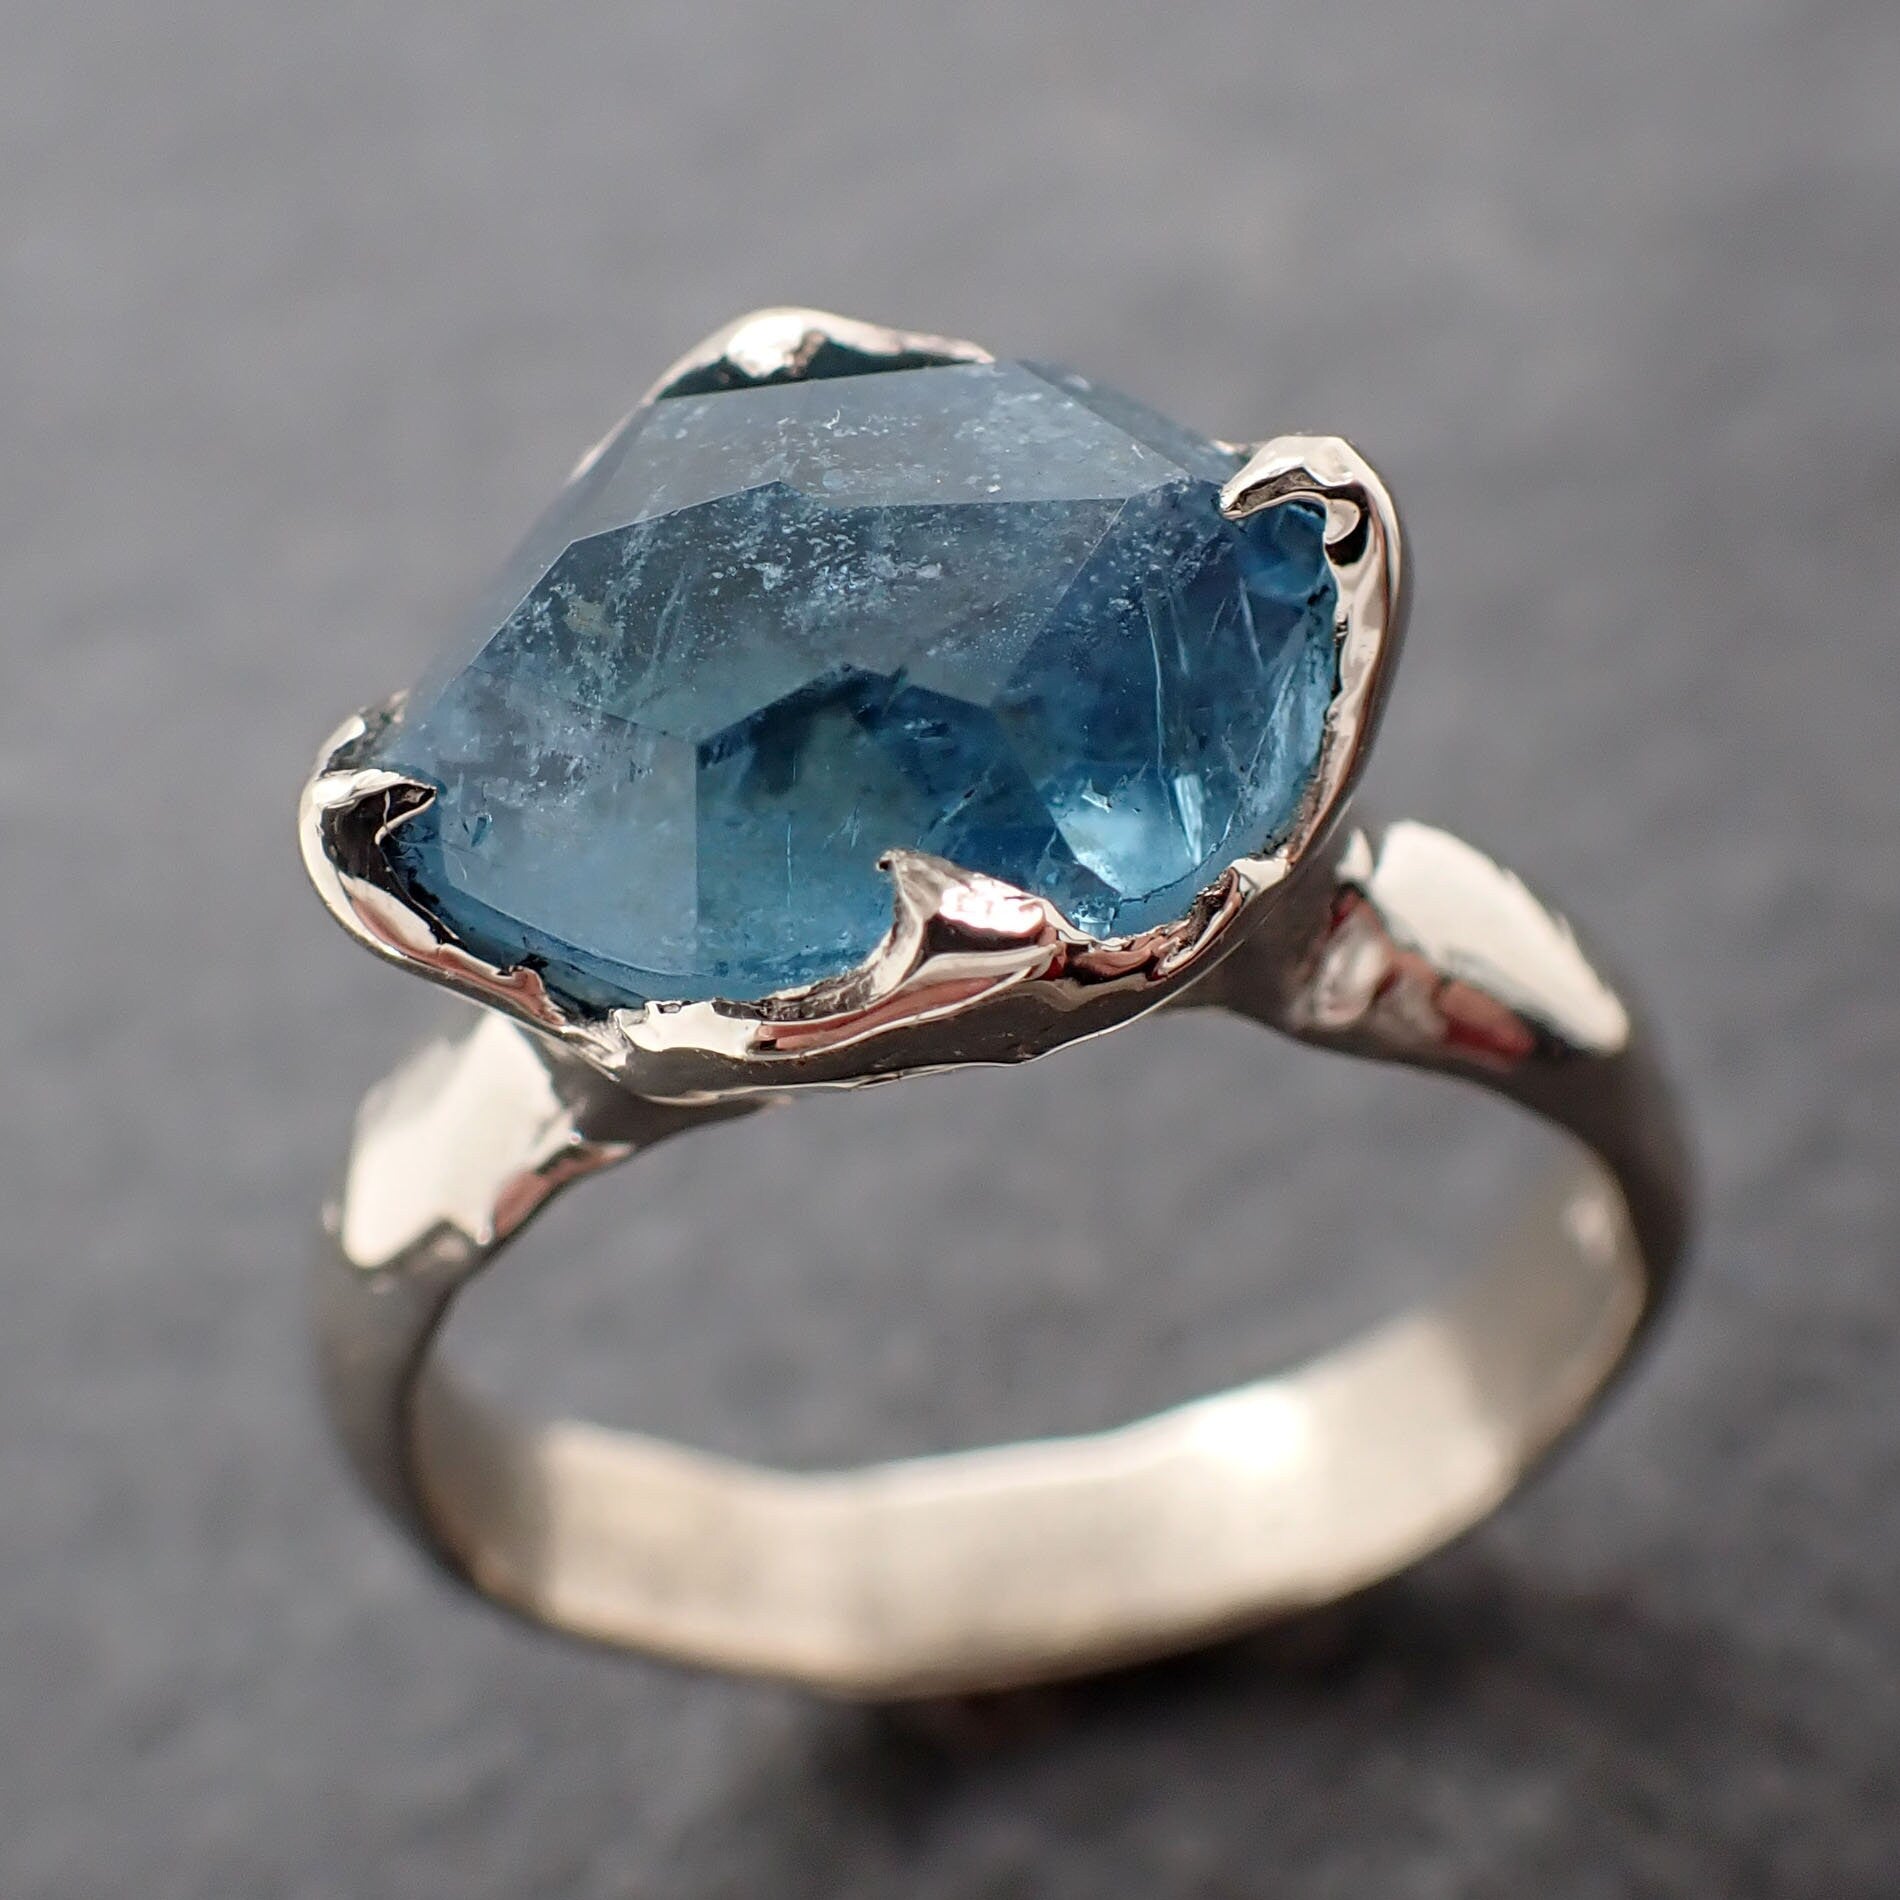 Partially faceted Aquamarine Solitaire Ring 14k gold Custom One Of a Kind Gemstone Ring Bespoke byAngeline 3060